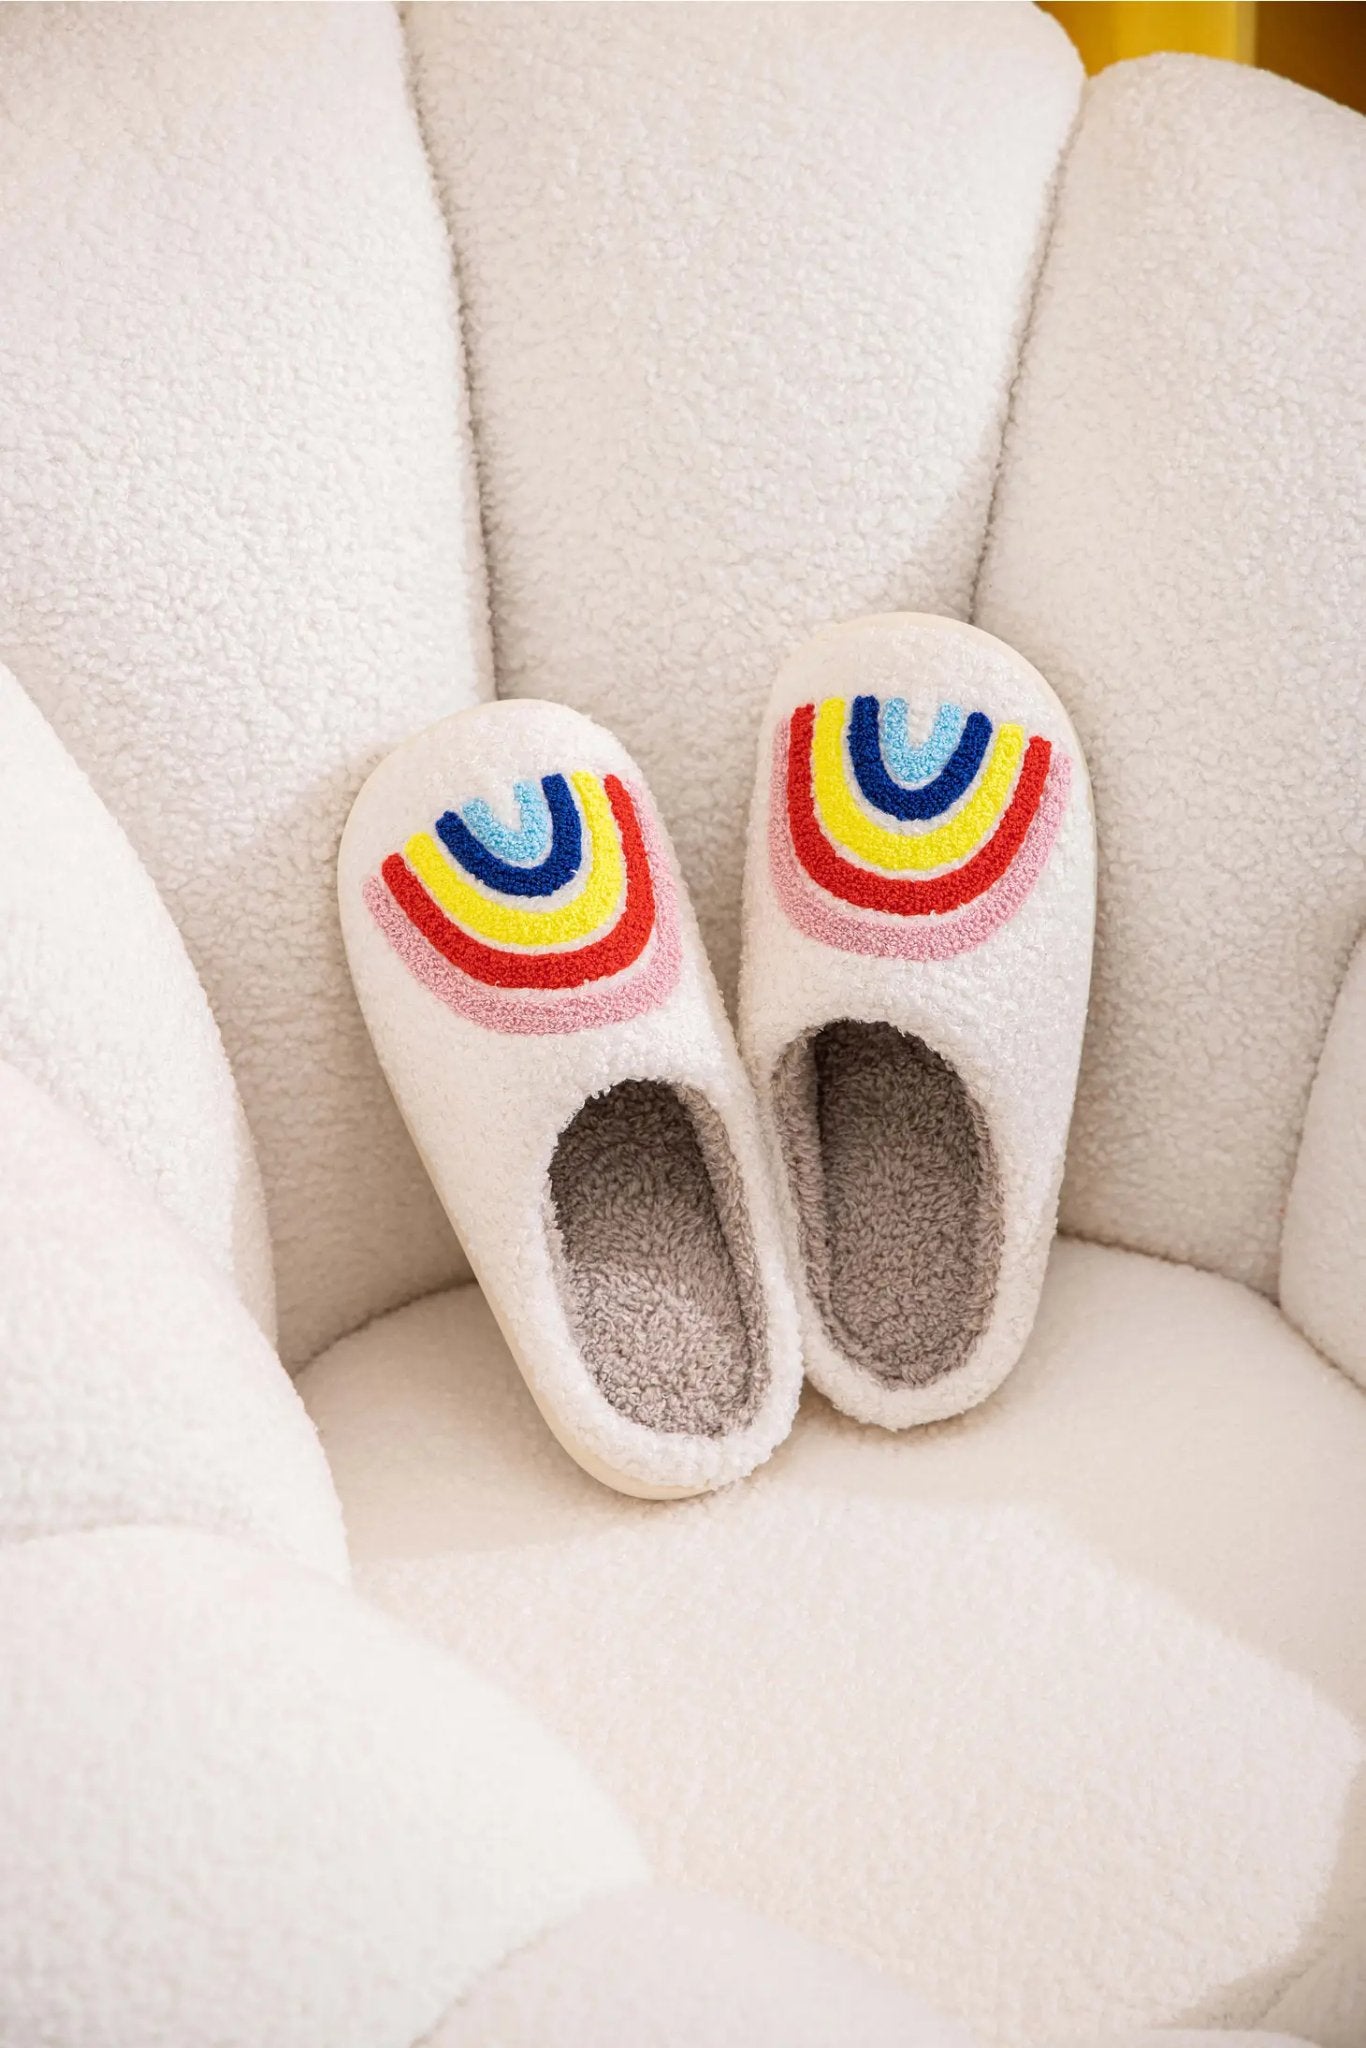 Fluffy Rainbow House Slippers - Small (5.5-6.5/37-38) - Slippers